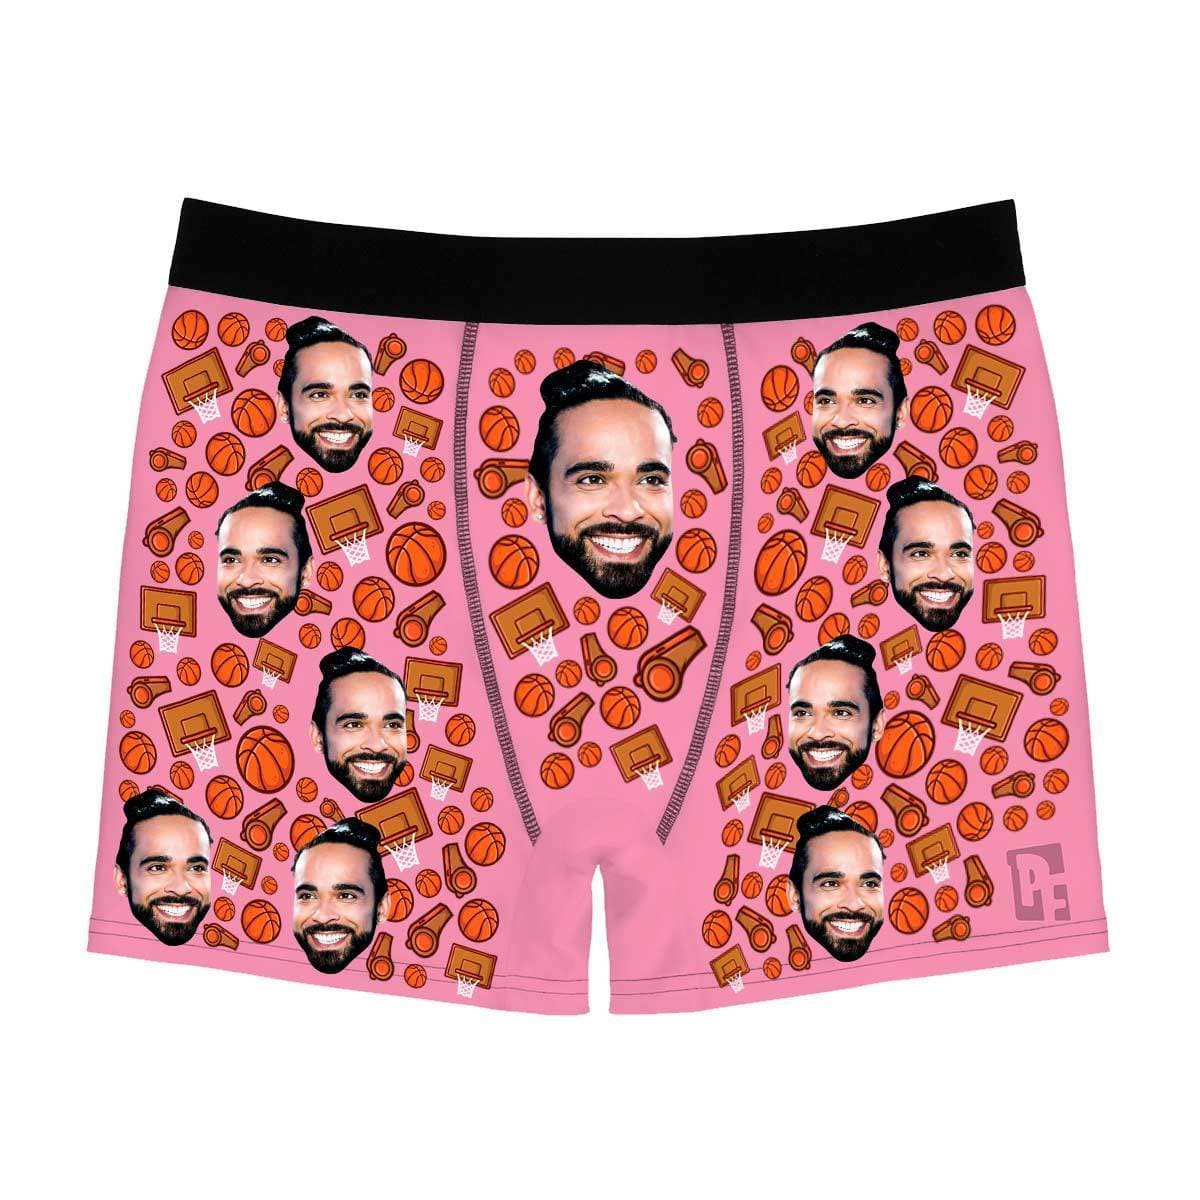 Pink Basketball men's boxer briefs personalized with photo printed on them